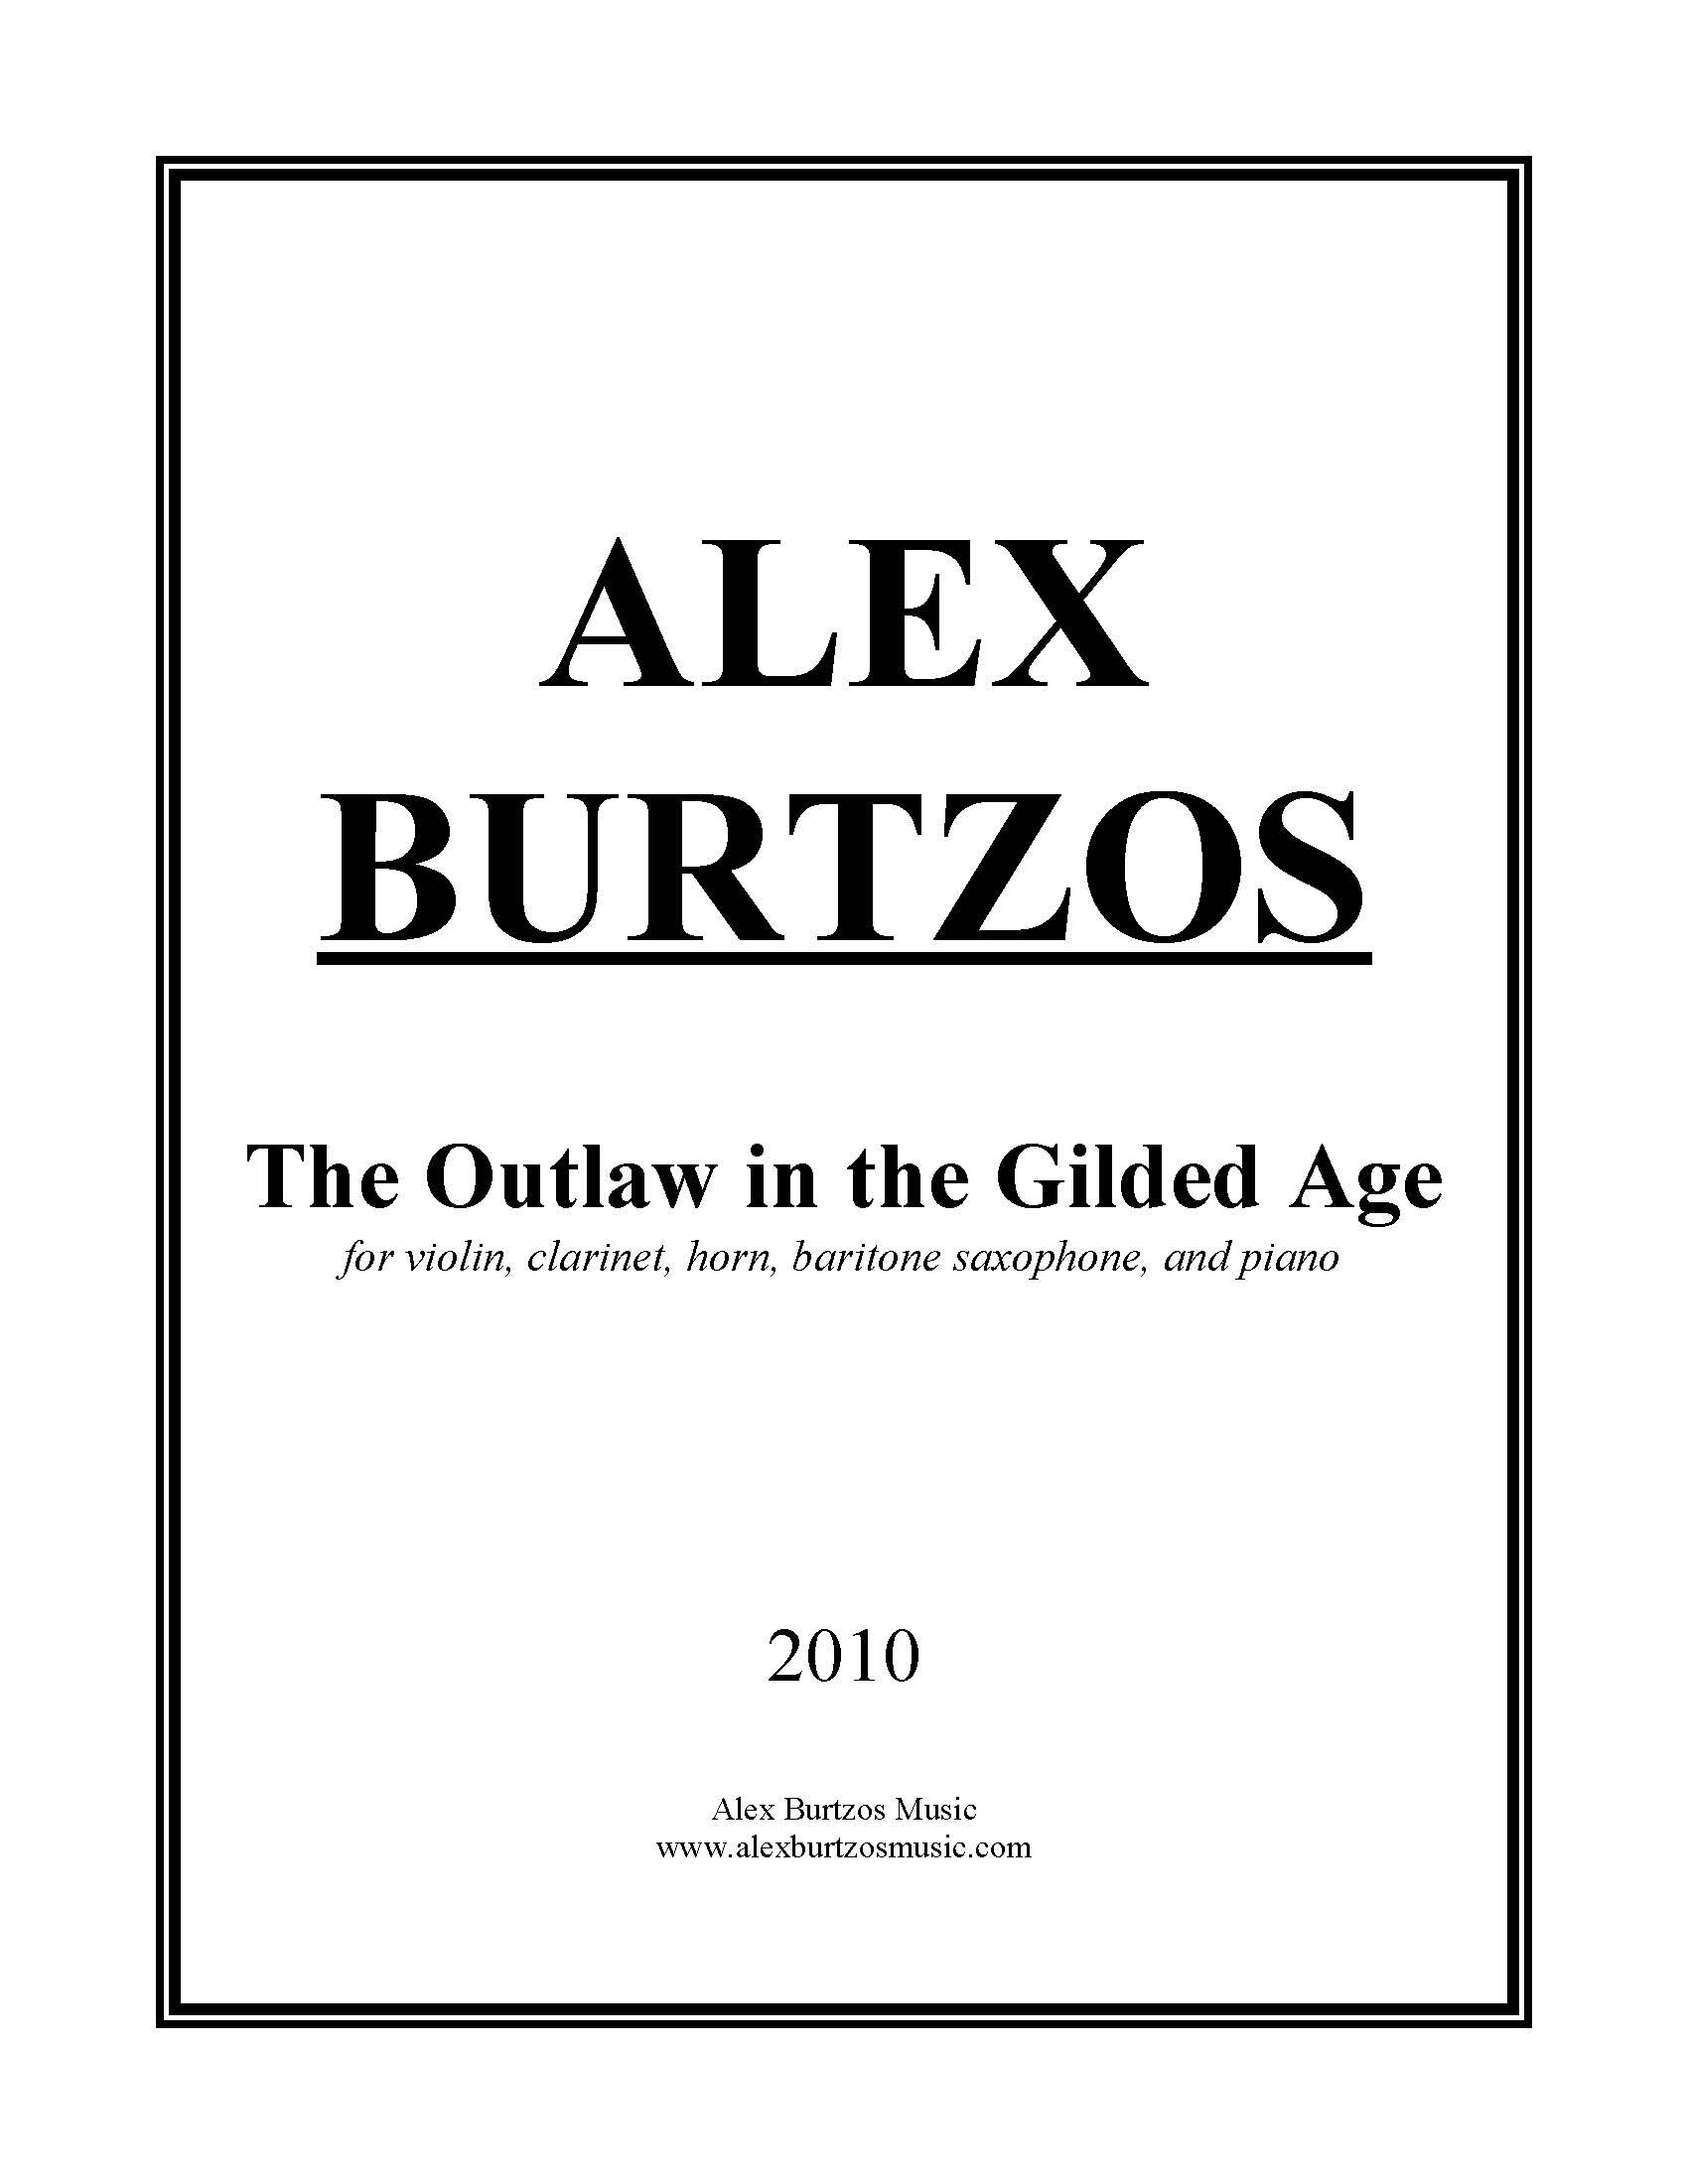 The Outlaw in the Gilded Age - Complete Score_Page_01.jpg